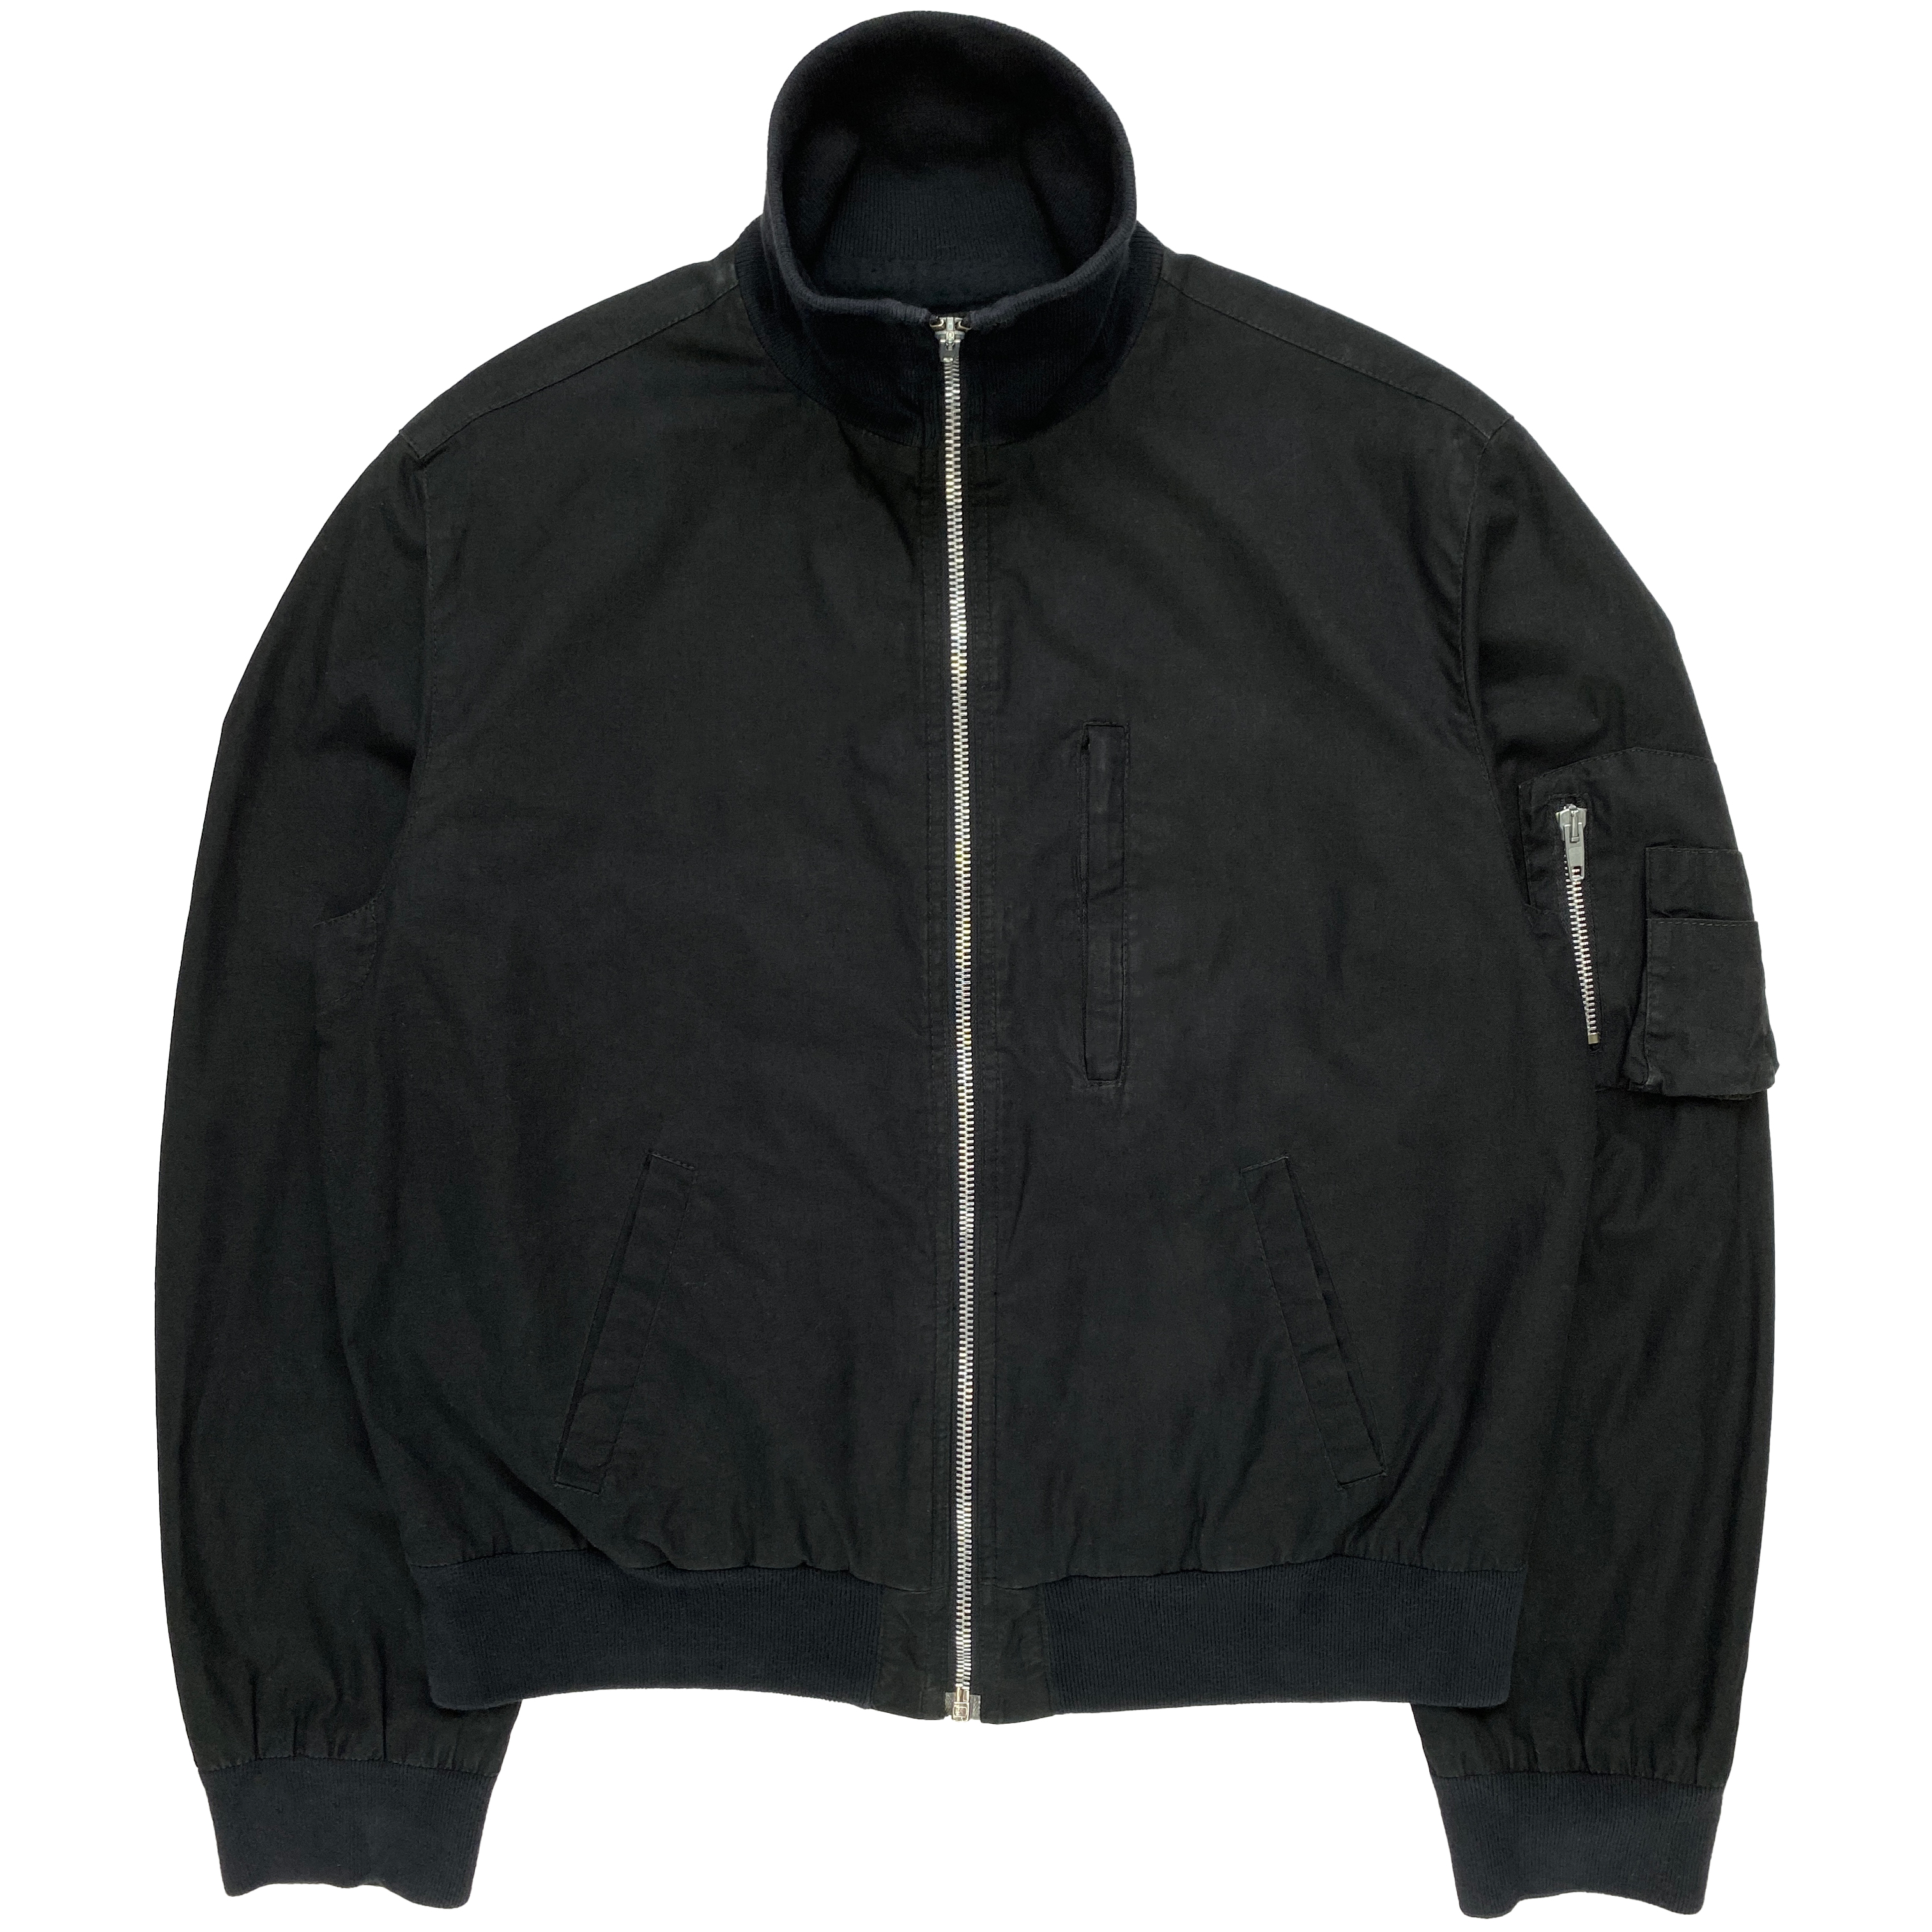 Helmut Lang, S/S 1999 Resin Coated Cotton High Collar MA-1 Bomber 